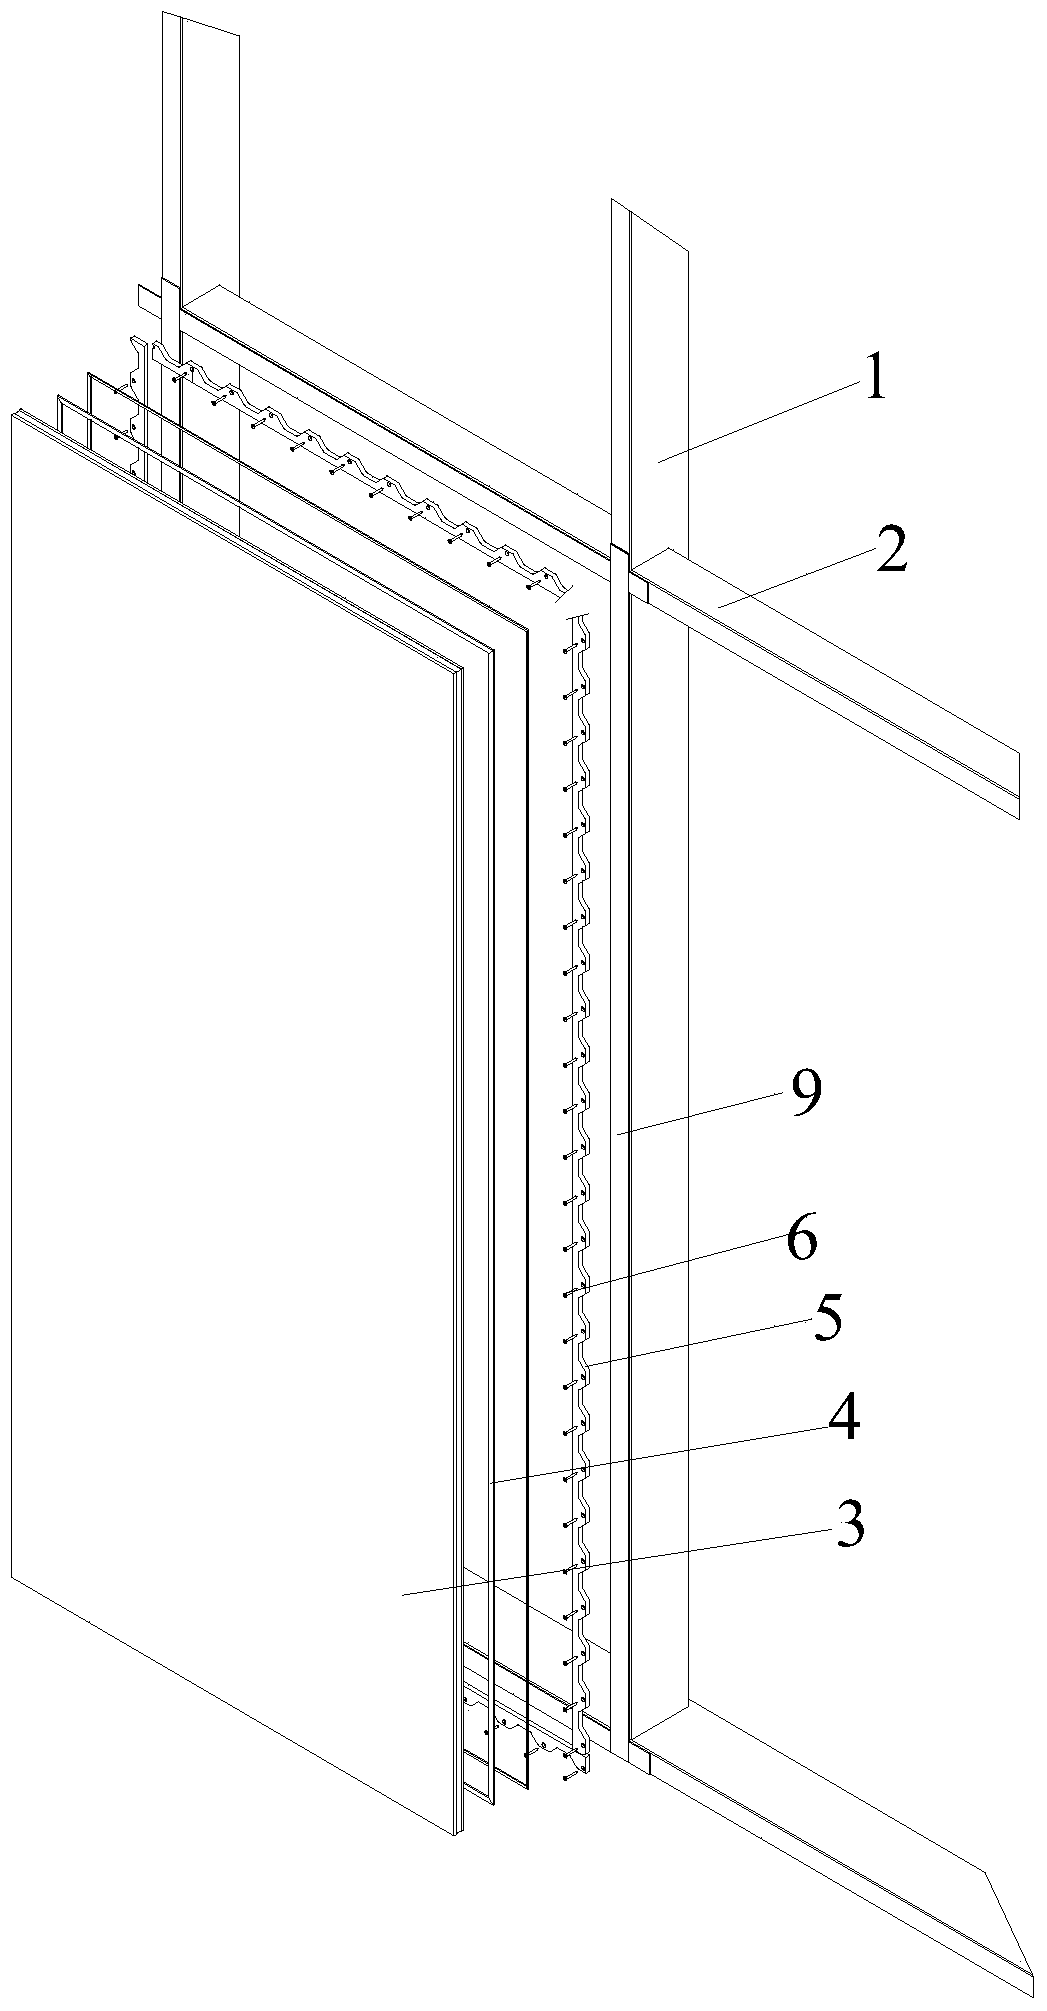 A curtain wall glass peripheral structure